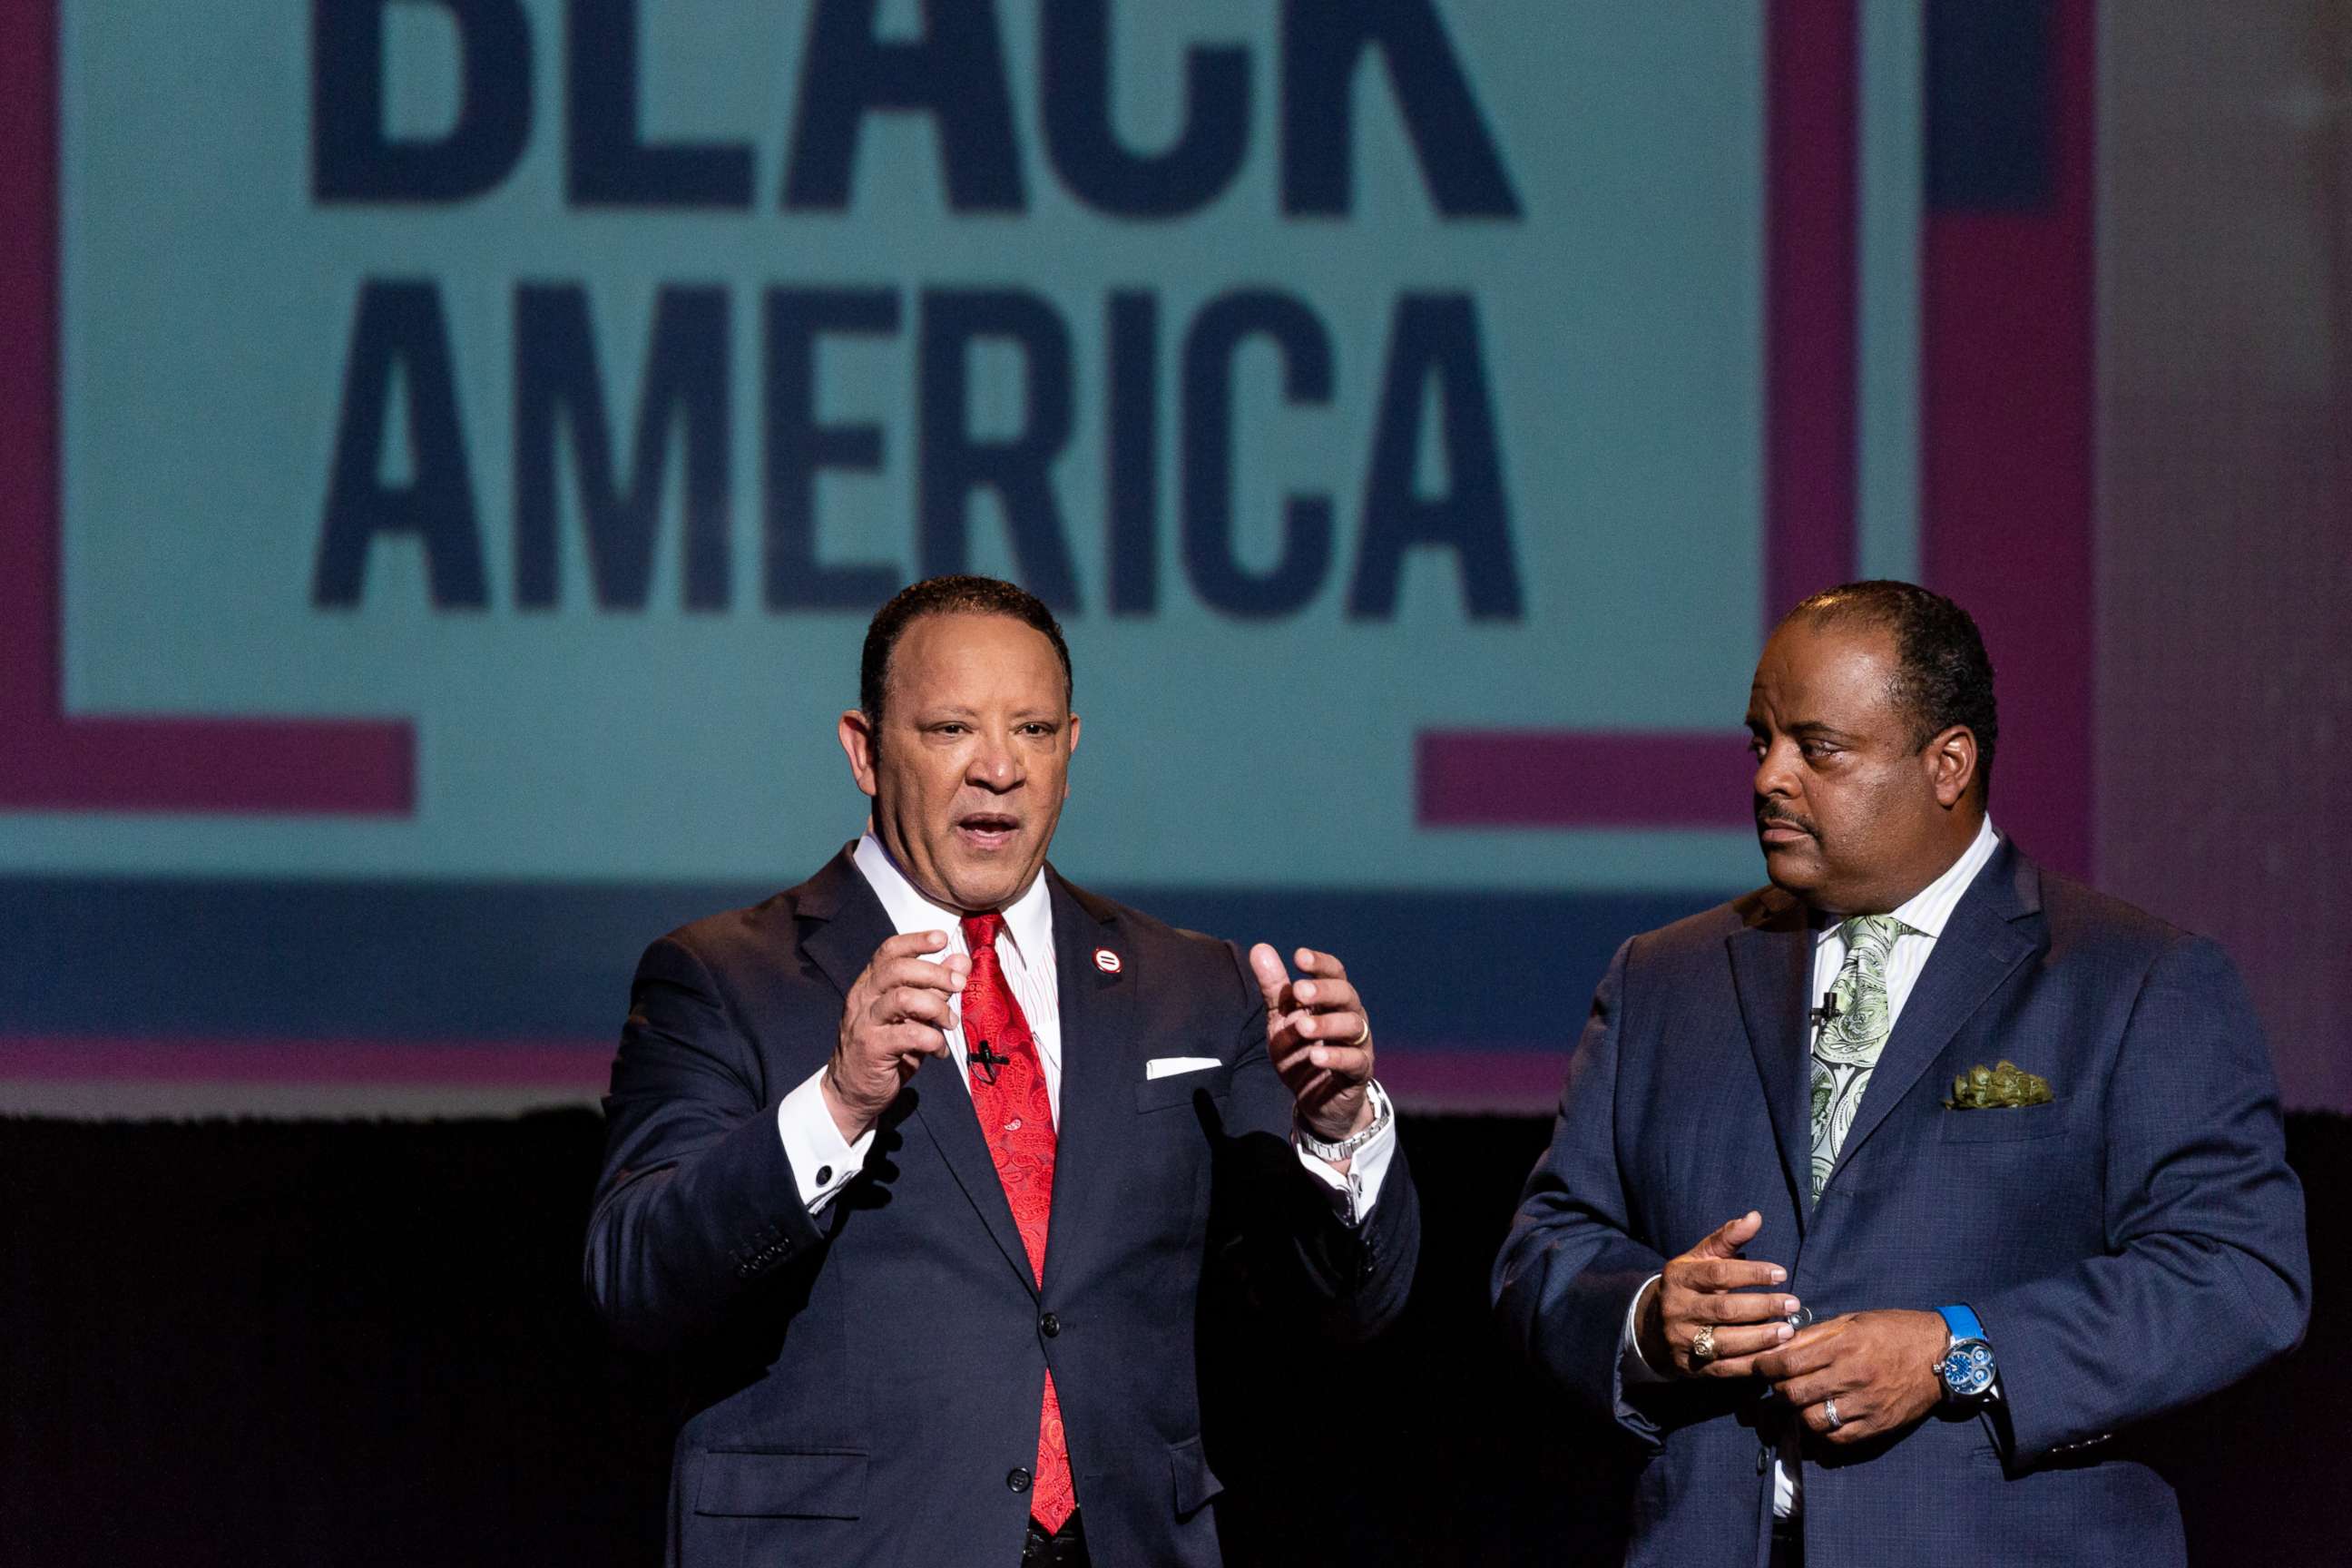 PHOTO: Marc Morial, President and CEO of the National Urban League, participates in a televised town hall at The Howard Theatre in Washington, D.C., May 8, 2018, on The State of Black America.